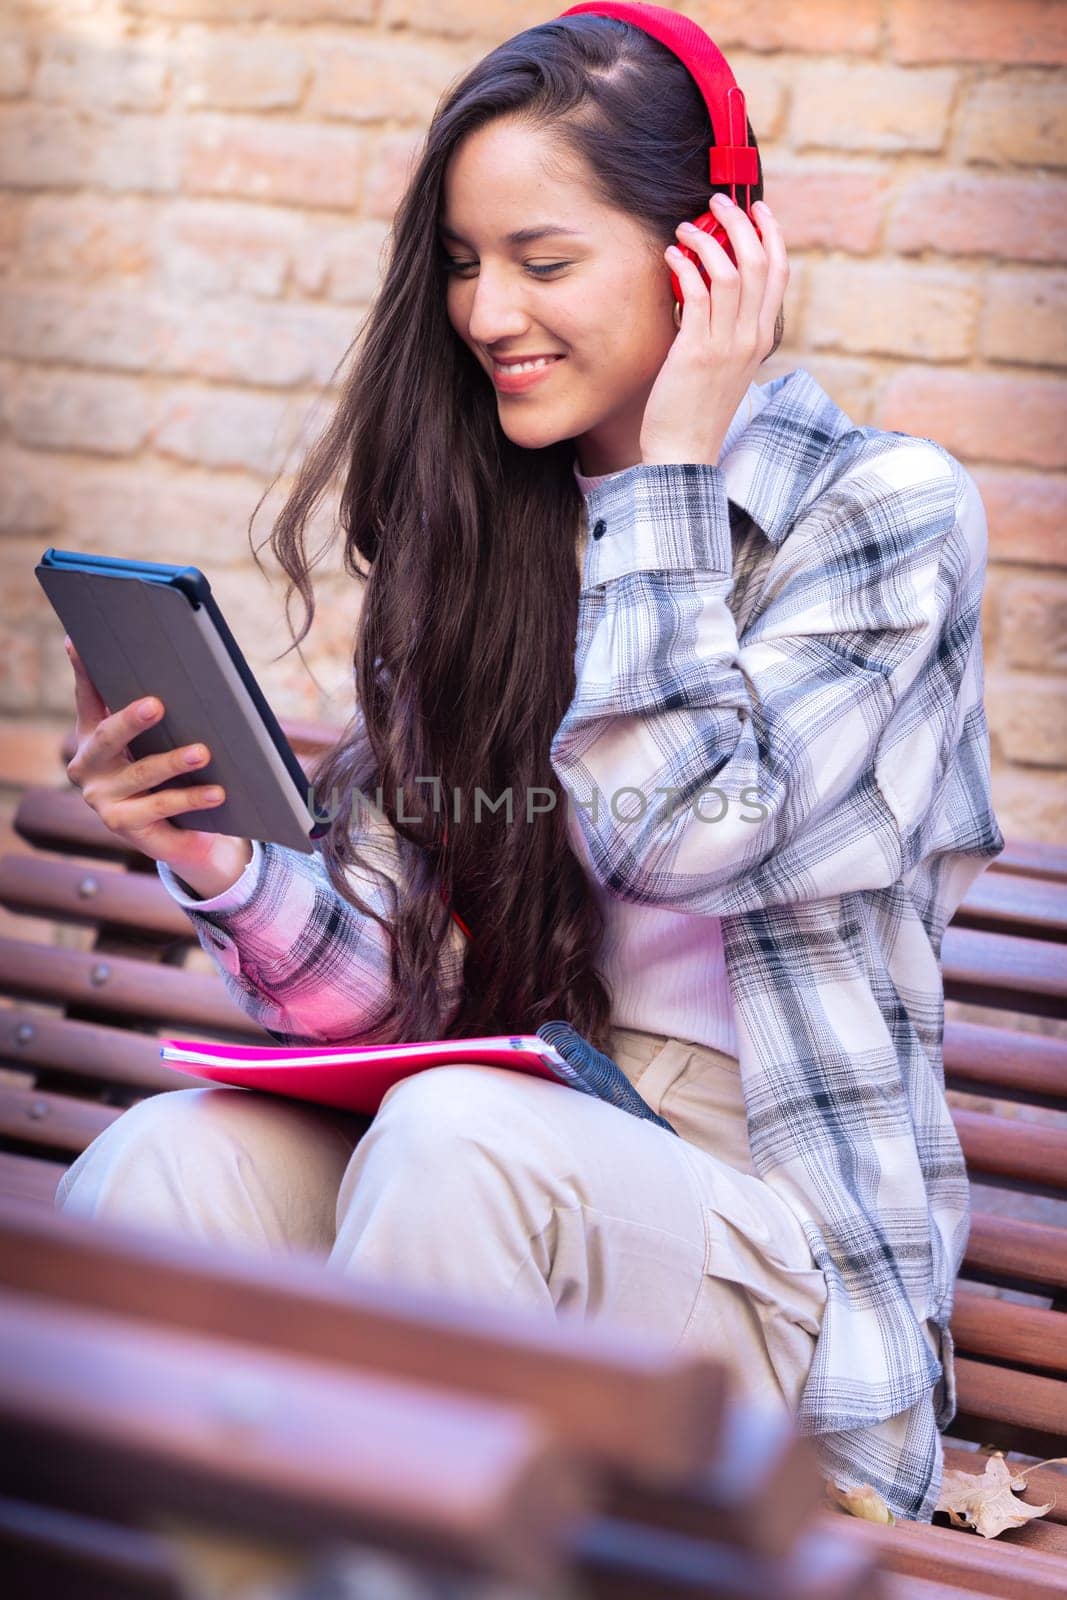 Young smiling student with notebook in hand uses social networks with tablet applications and wireless technology outdoors.Vertical